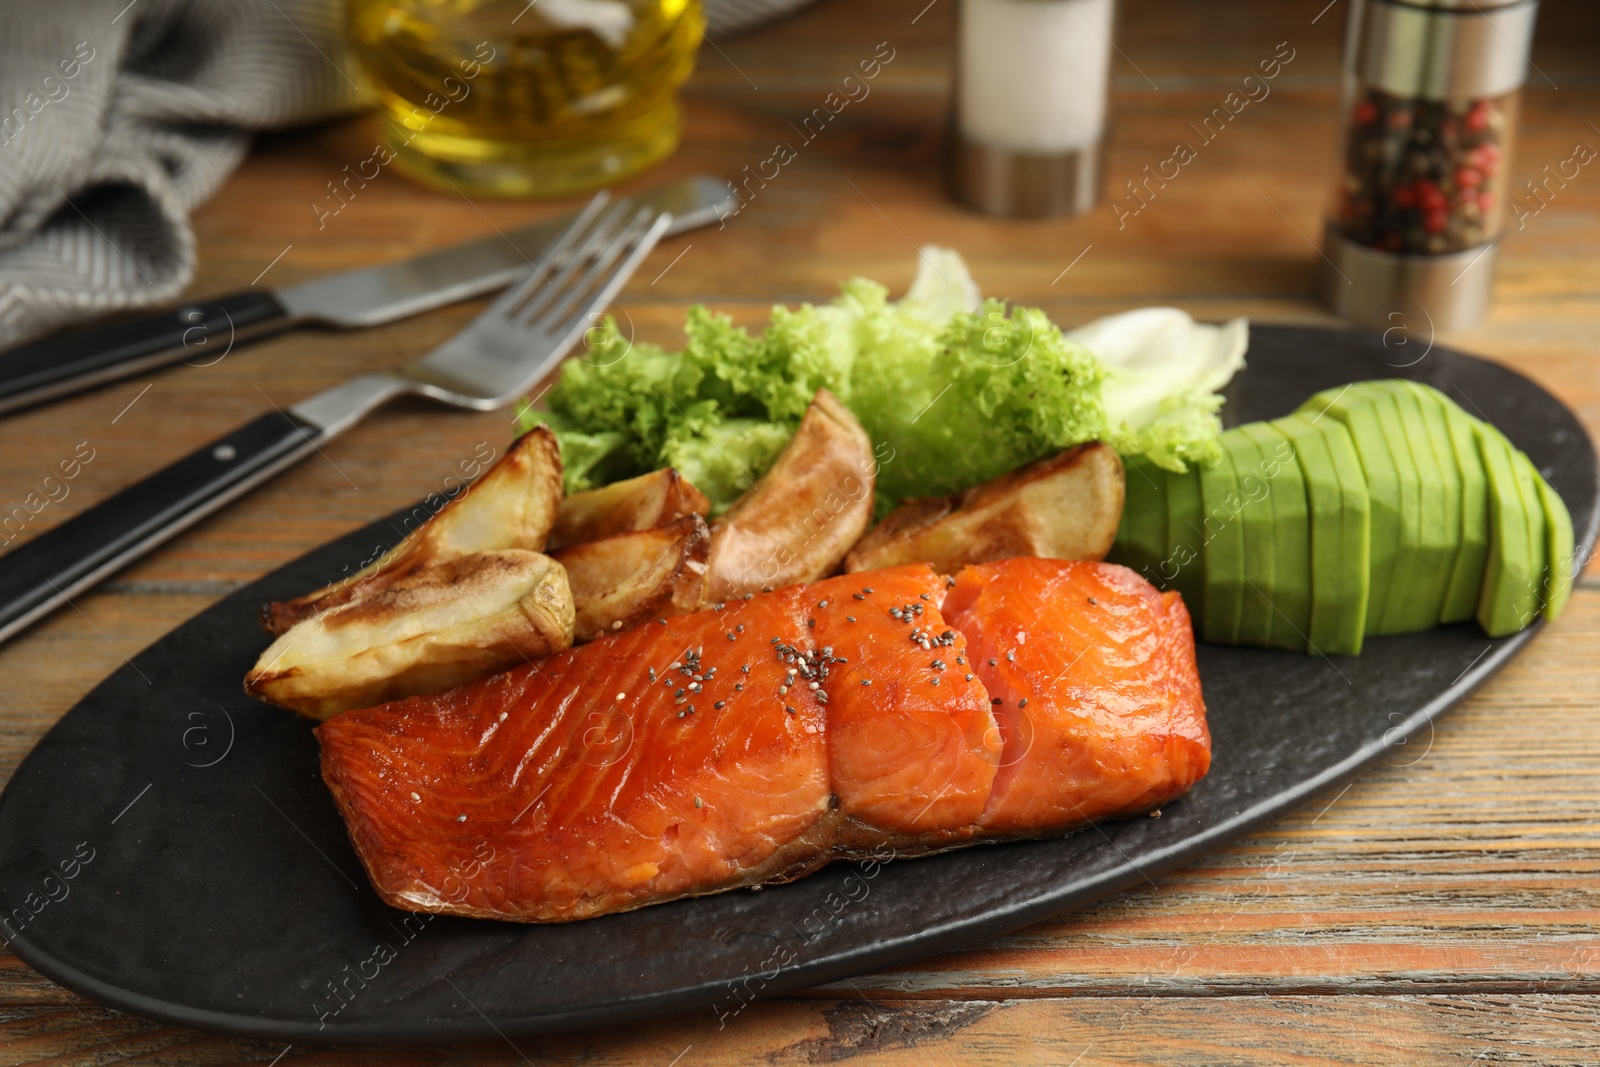 Photo of Tasty cooked salmon and vegetables served on wooden table. Healthy meals from air fryer